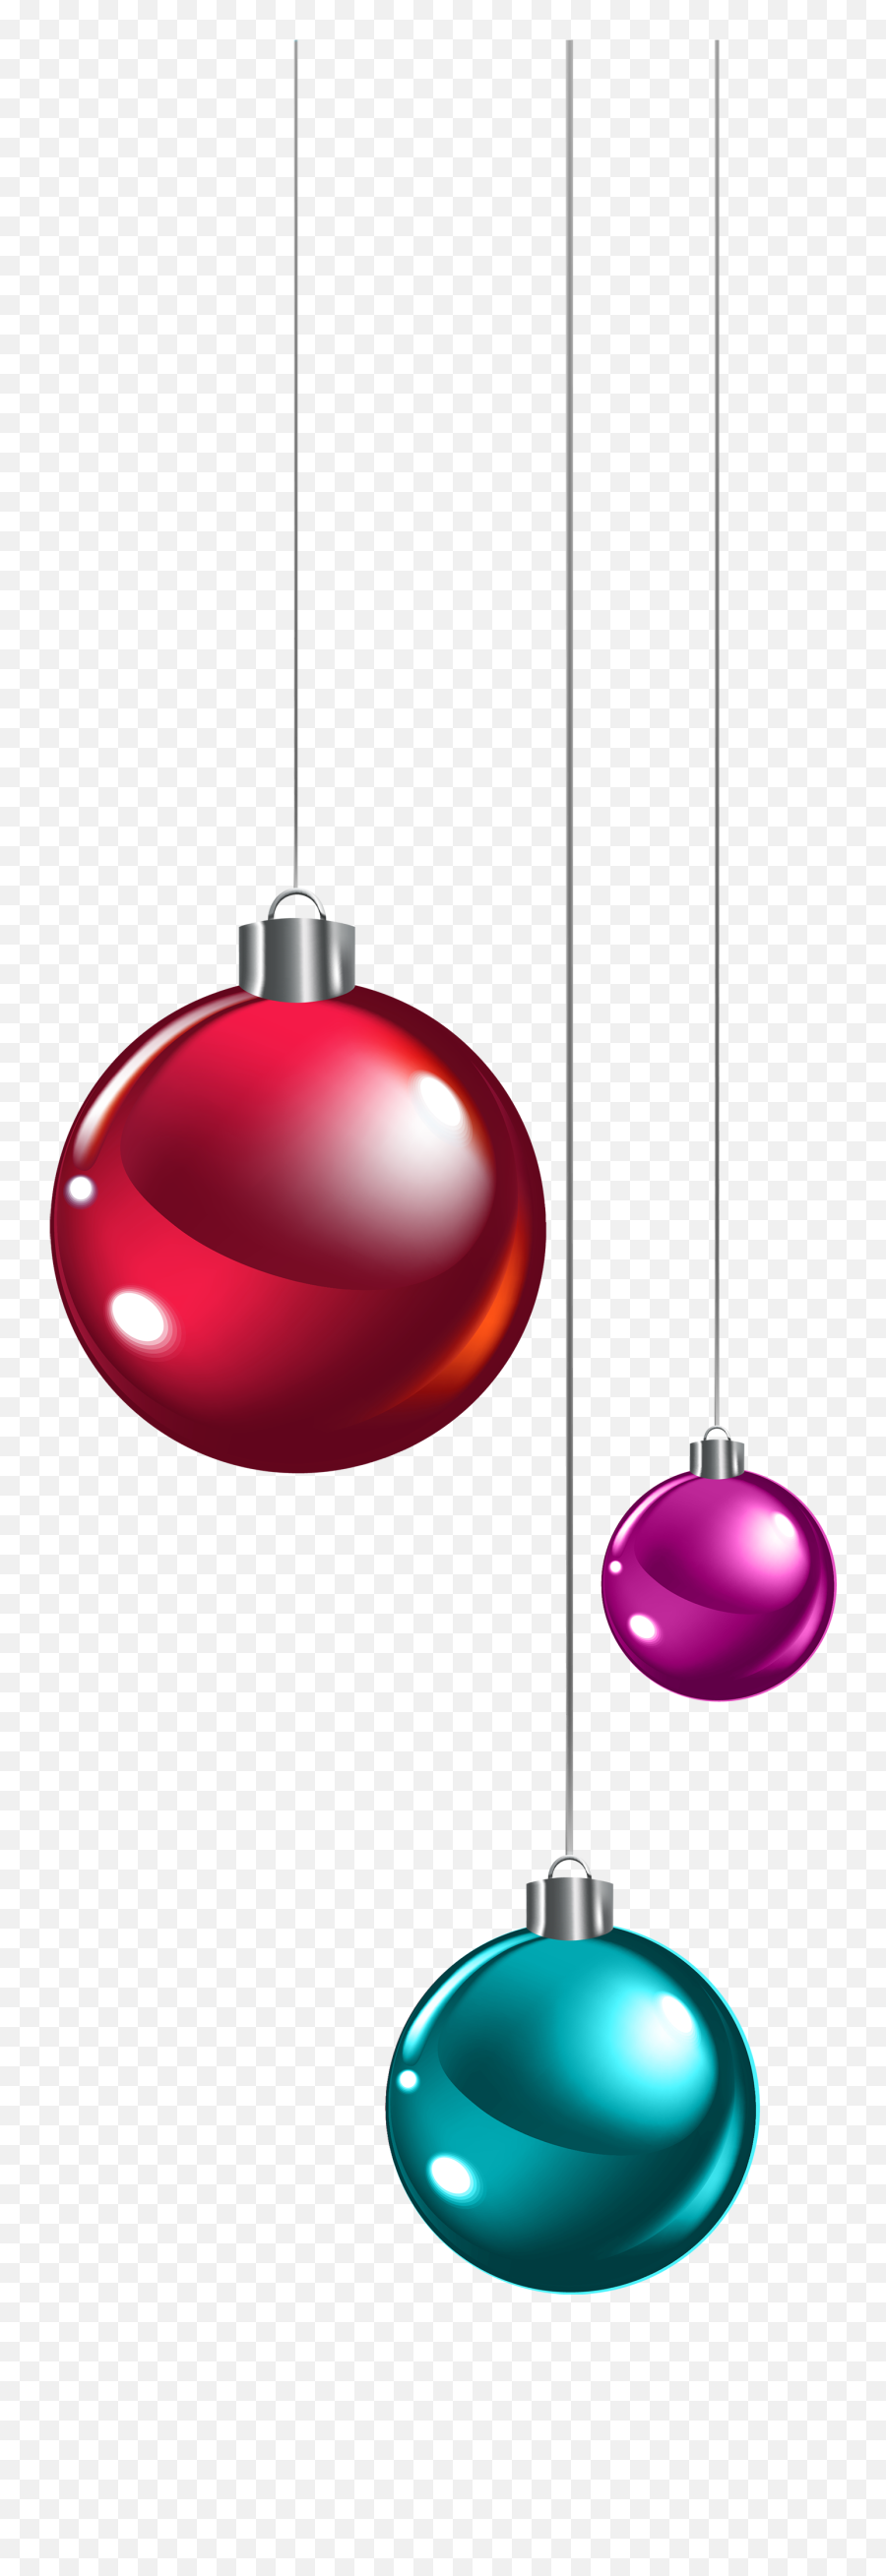 Download 28 Collection Of Hanging Christmas Ornaments - Transparent Background Christmas Ball Png Emoji,Christmas Ornament Clipart